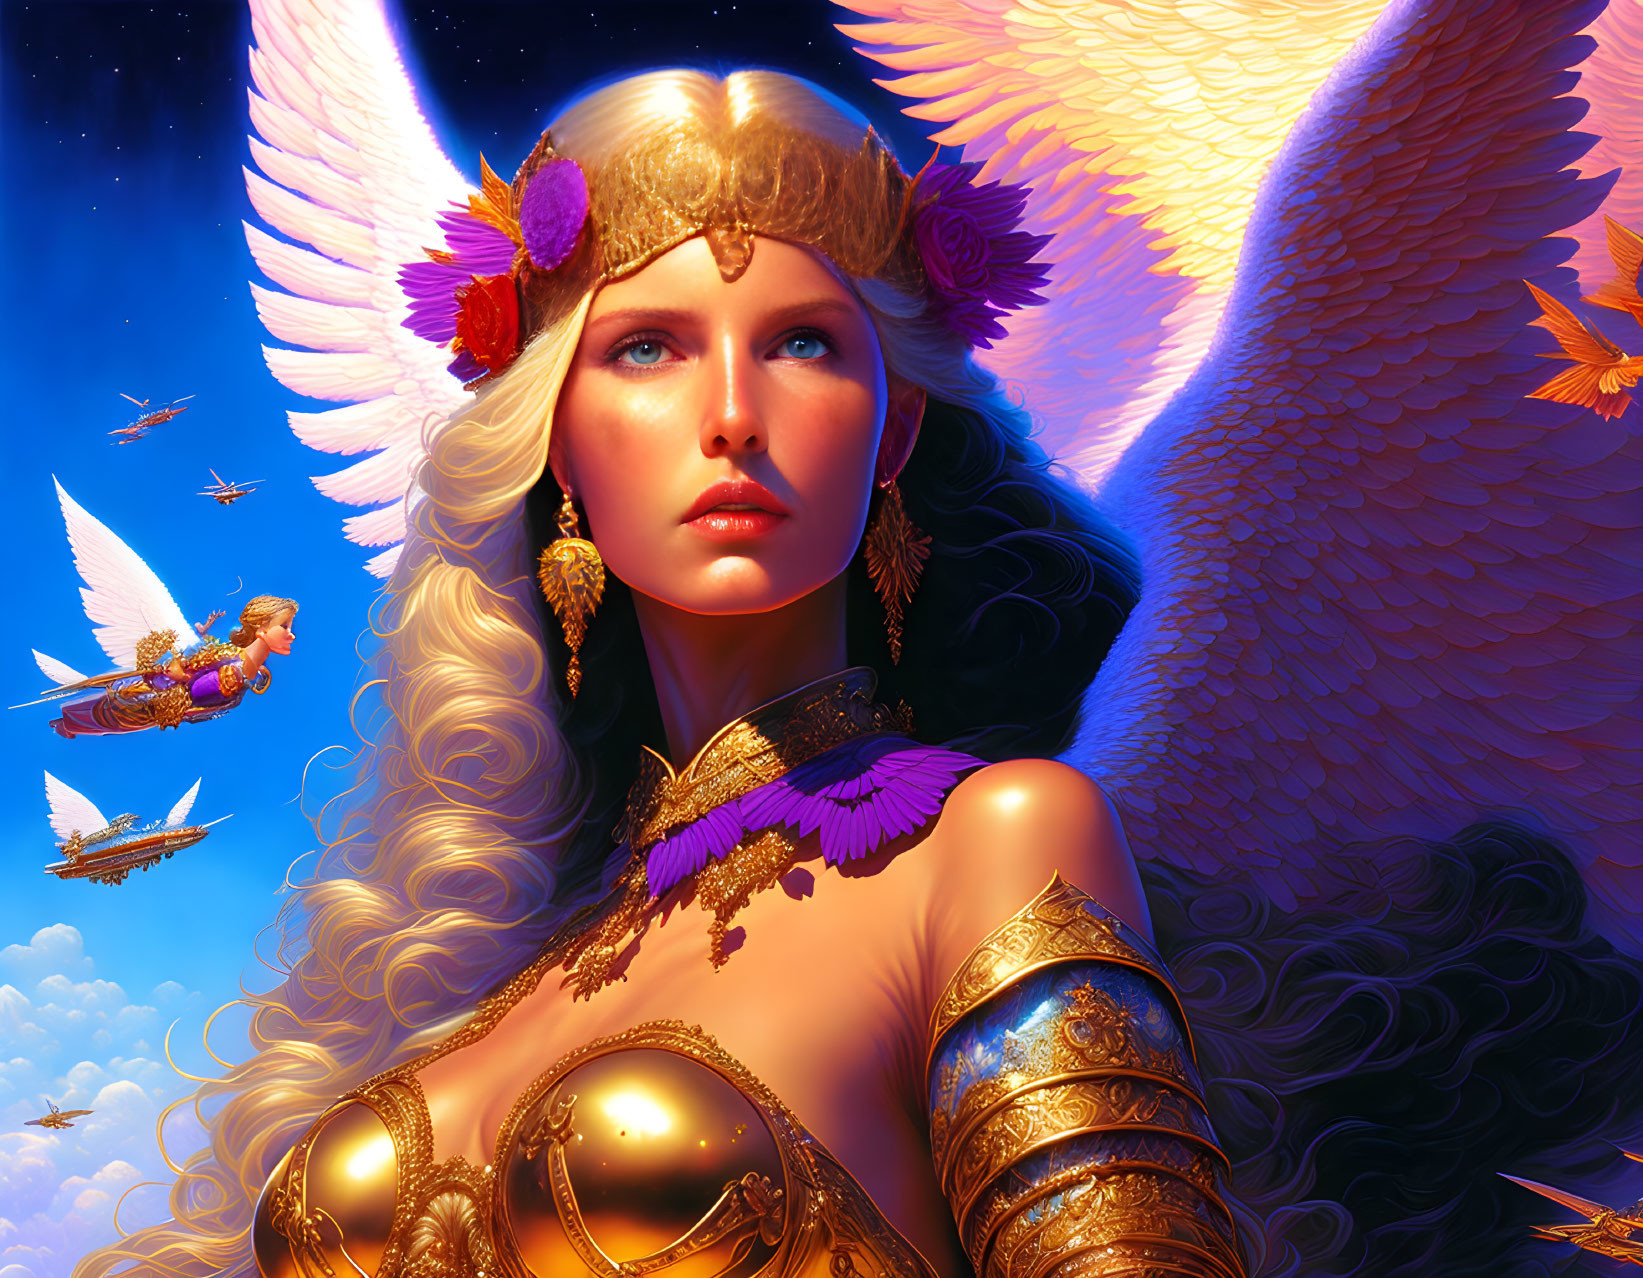 Fantasy illustration of winged woman in golden armor with birds against blue sky